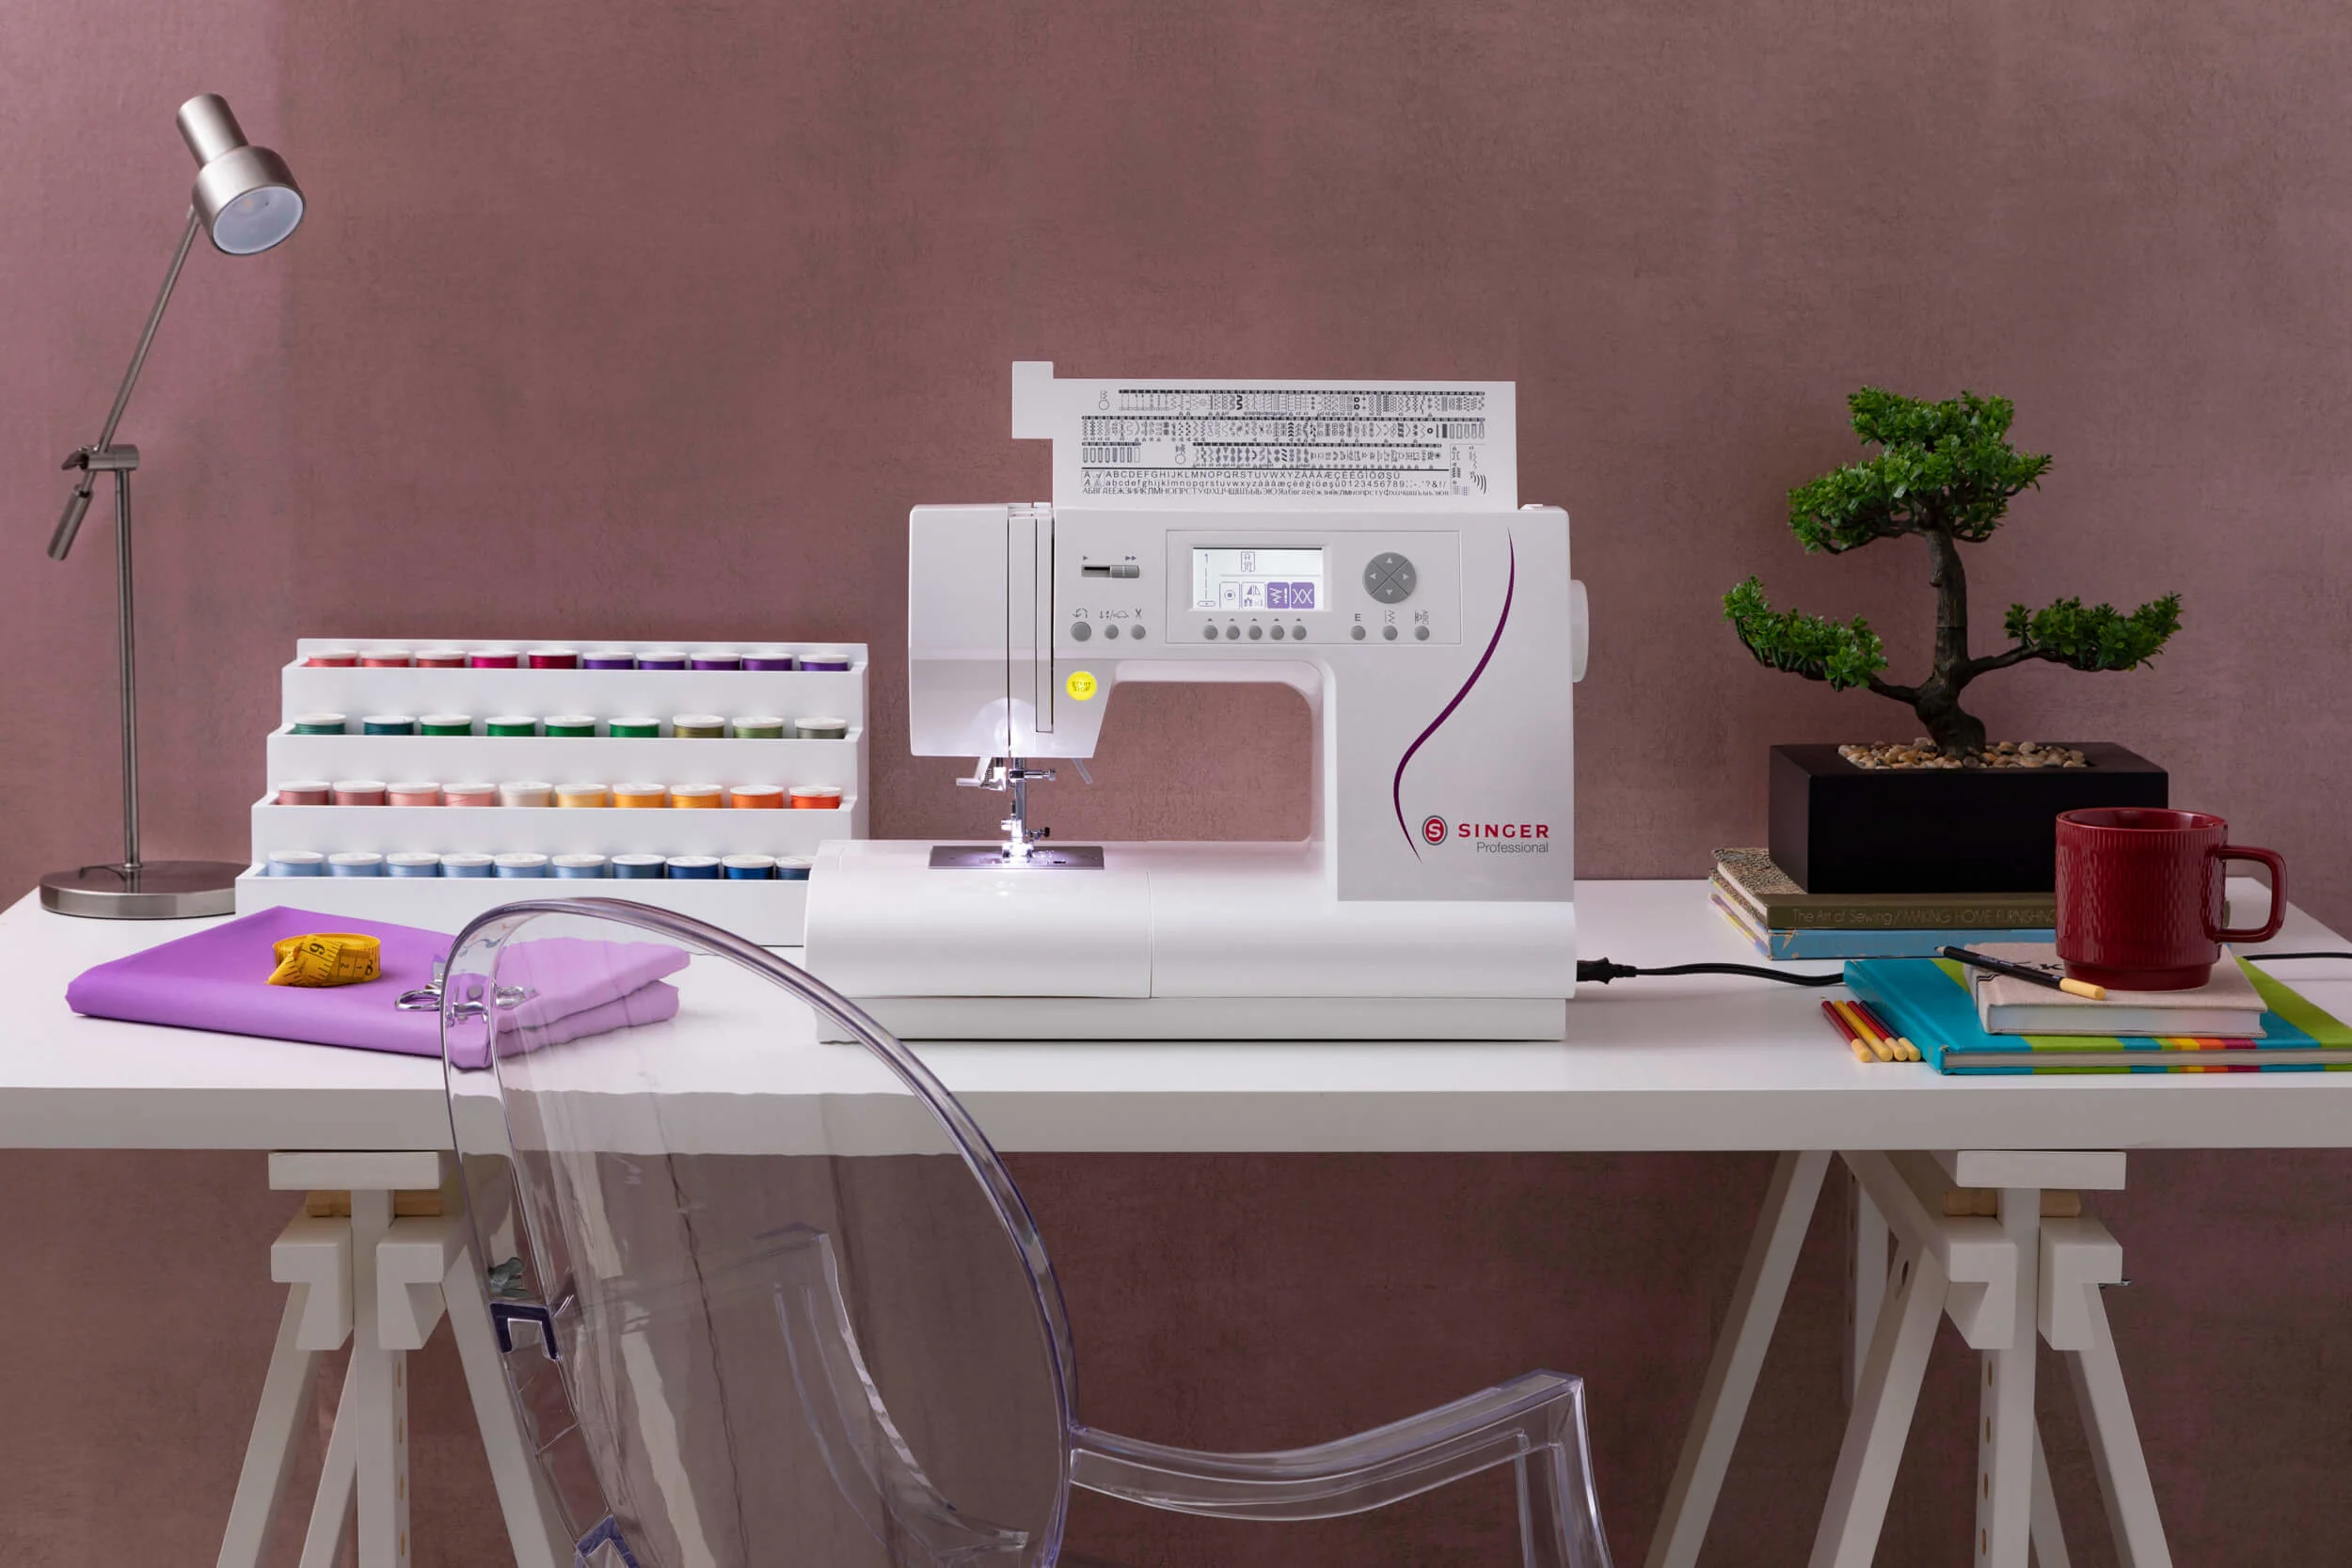 Singer C430 Sewing Machine on a table